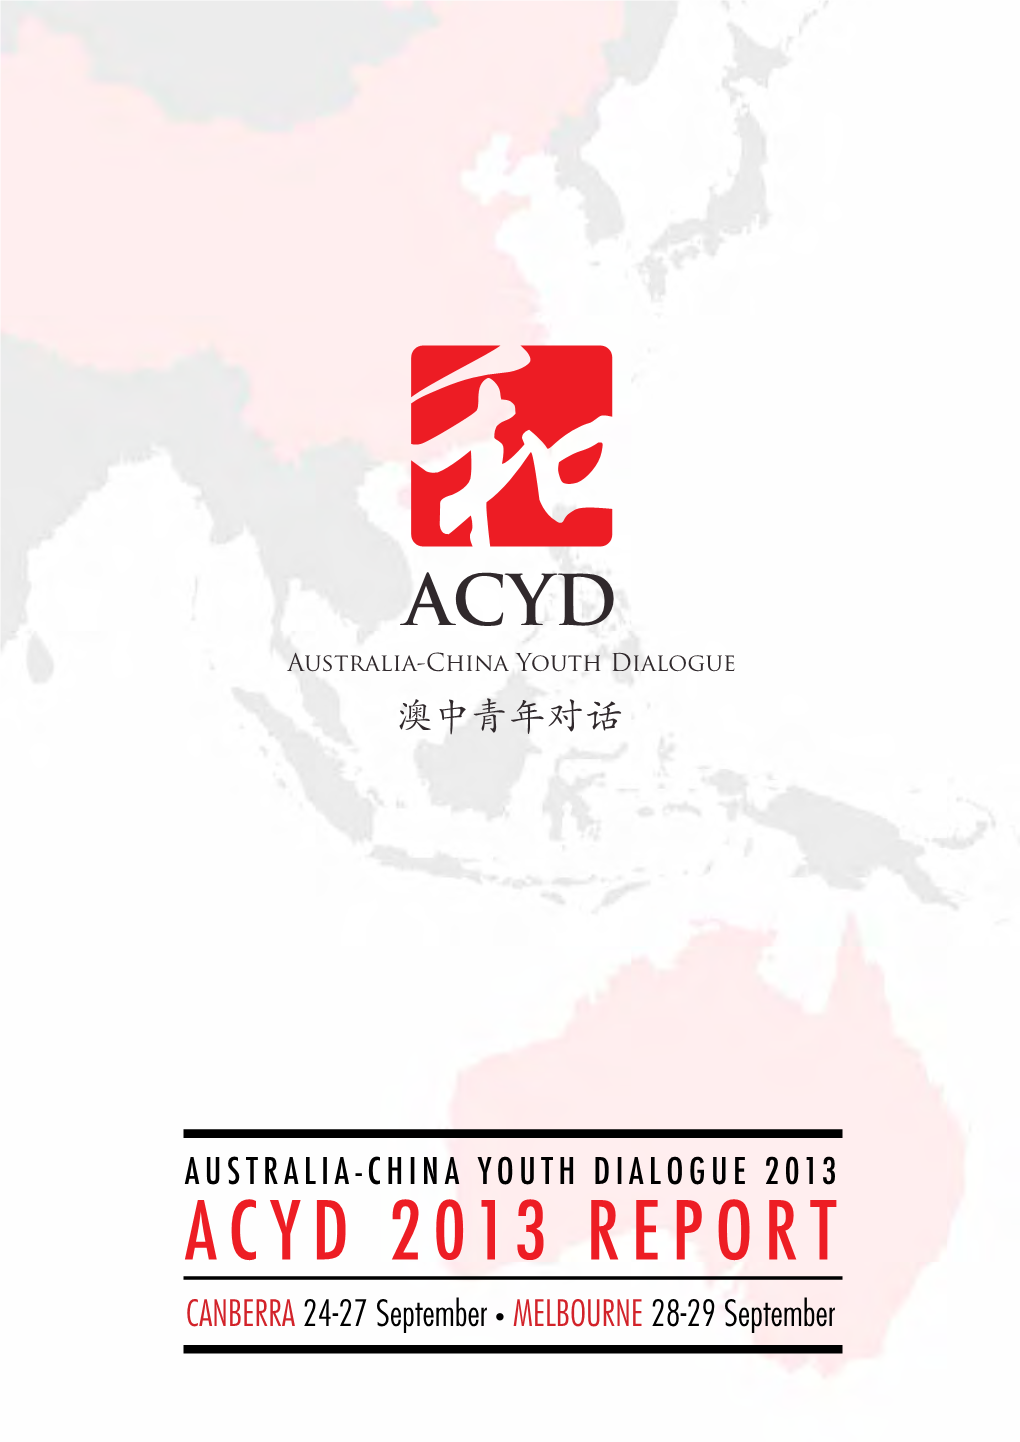 ACYD 2013 REPORT CANBERRA 24-27 September • MELBOURNE 28-29 September Contents 1 Welcome Message